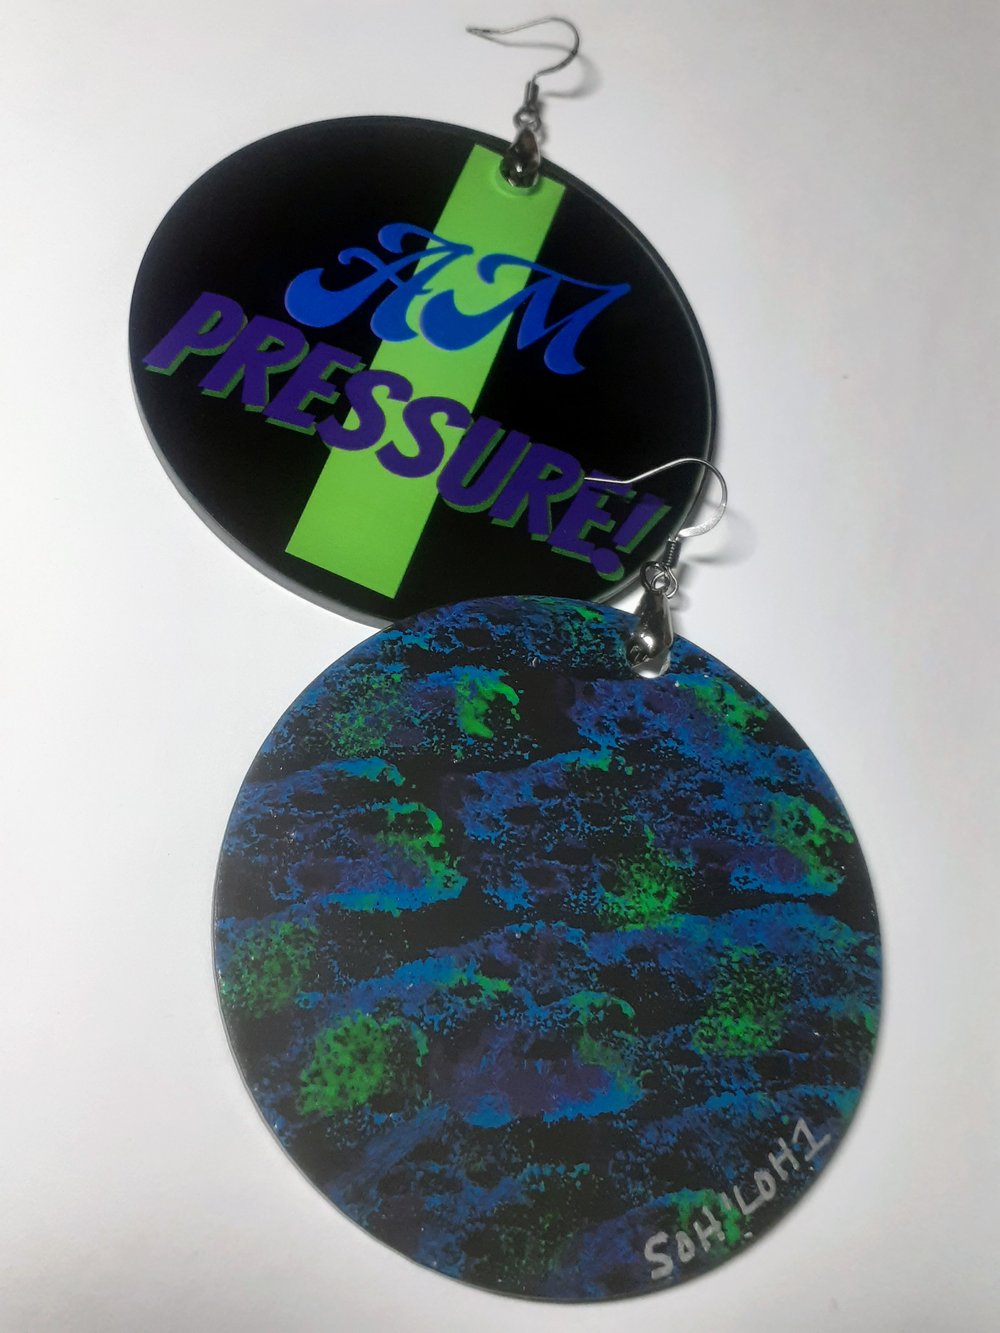 Image of I Am Pressure Urban Dangling Sublimation earrings